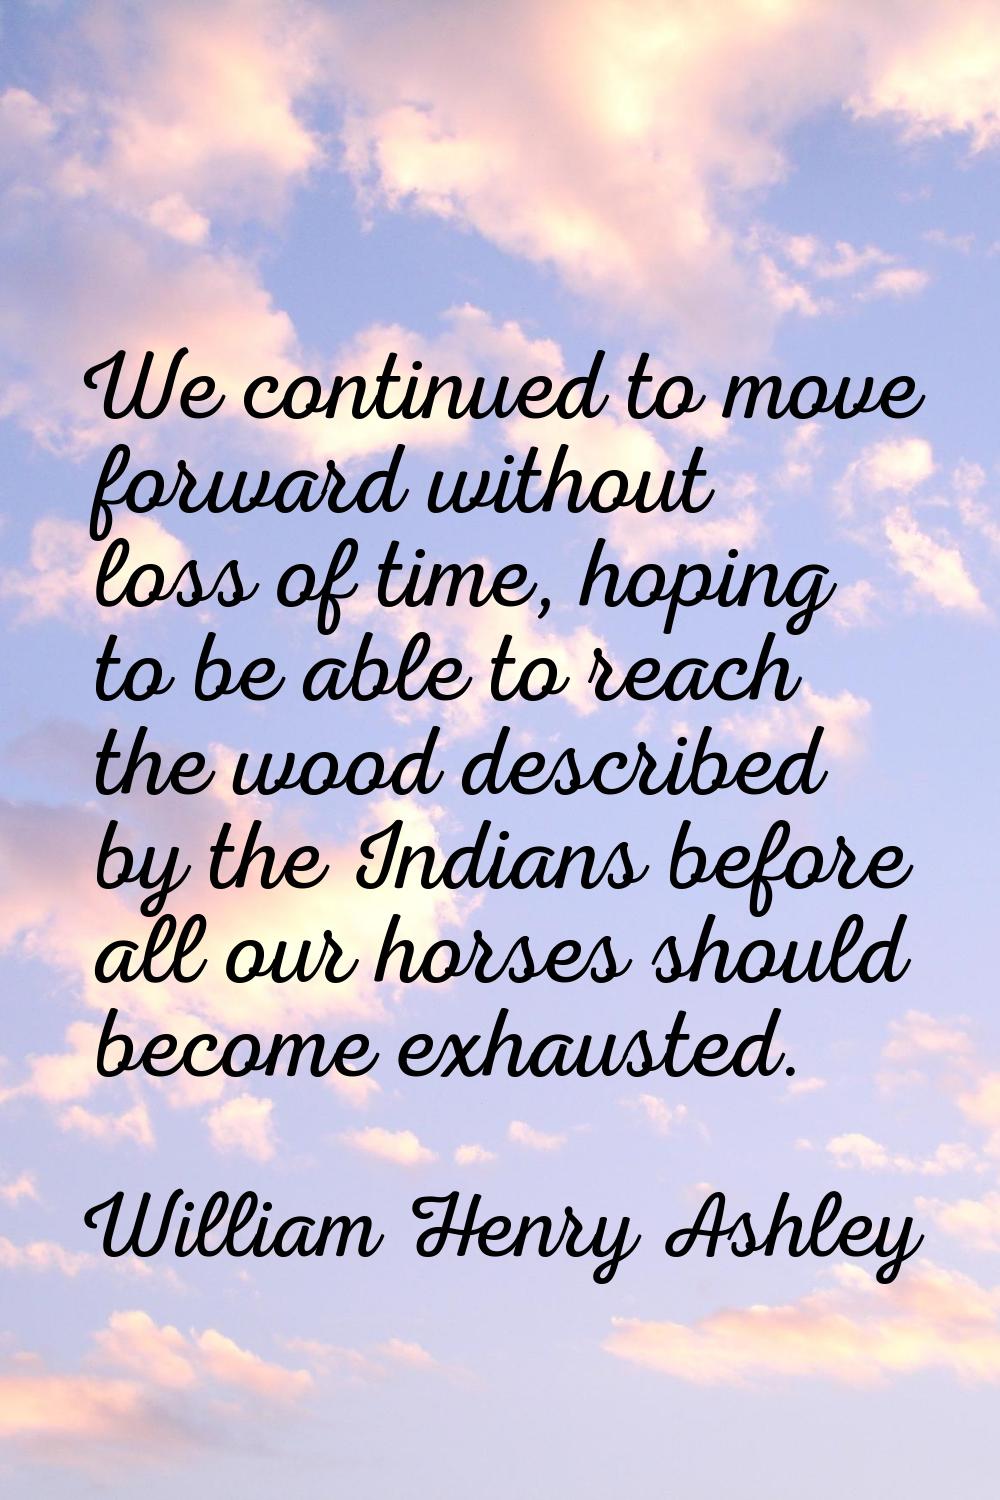 We continued to move forward without loss of time, hoping to be able to reach the wood described by